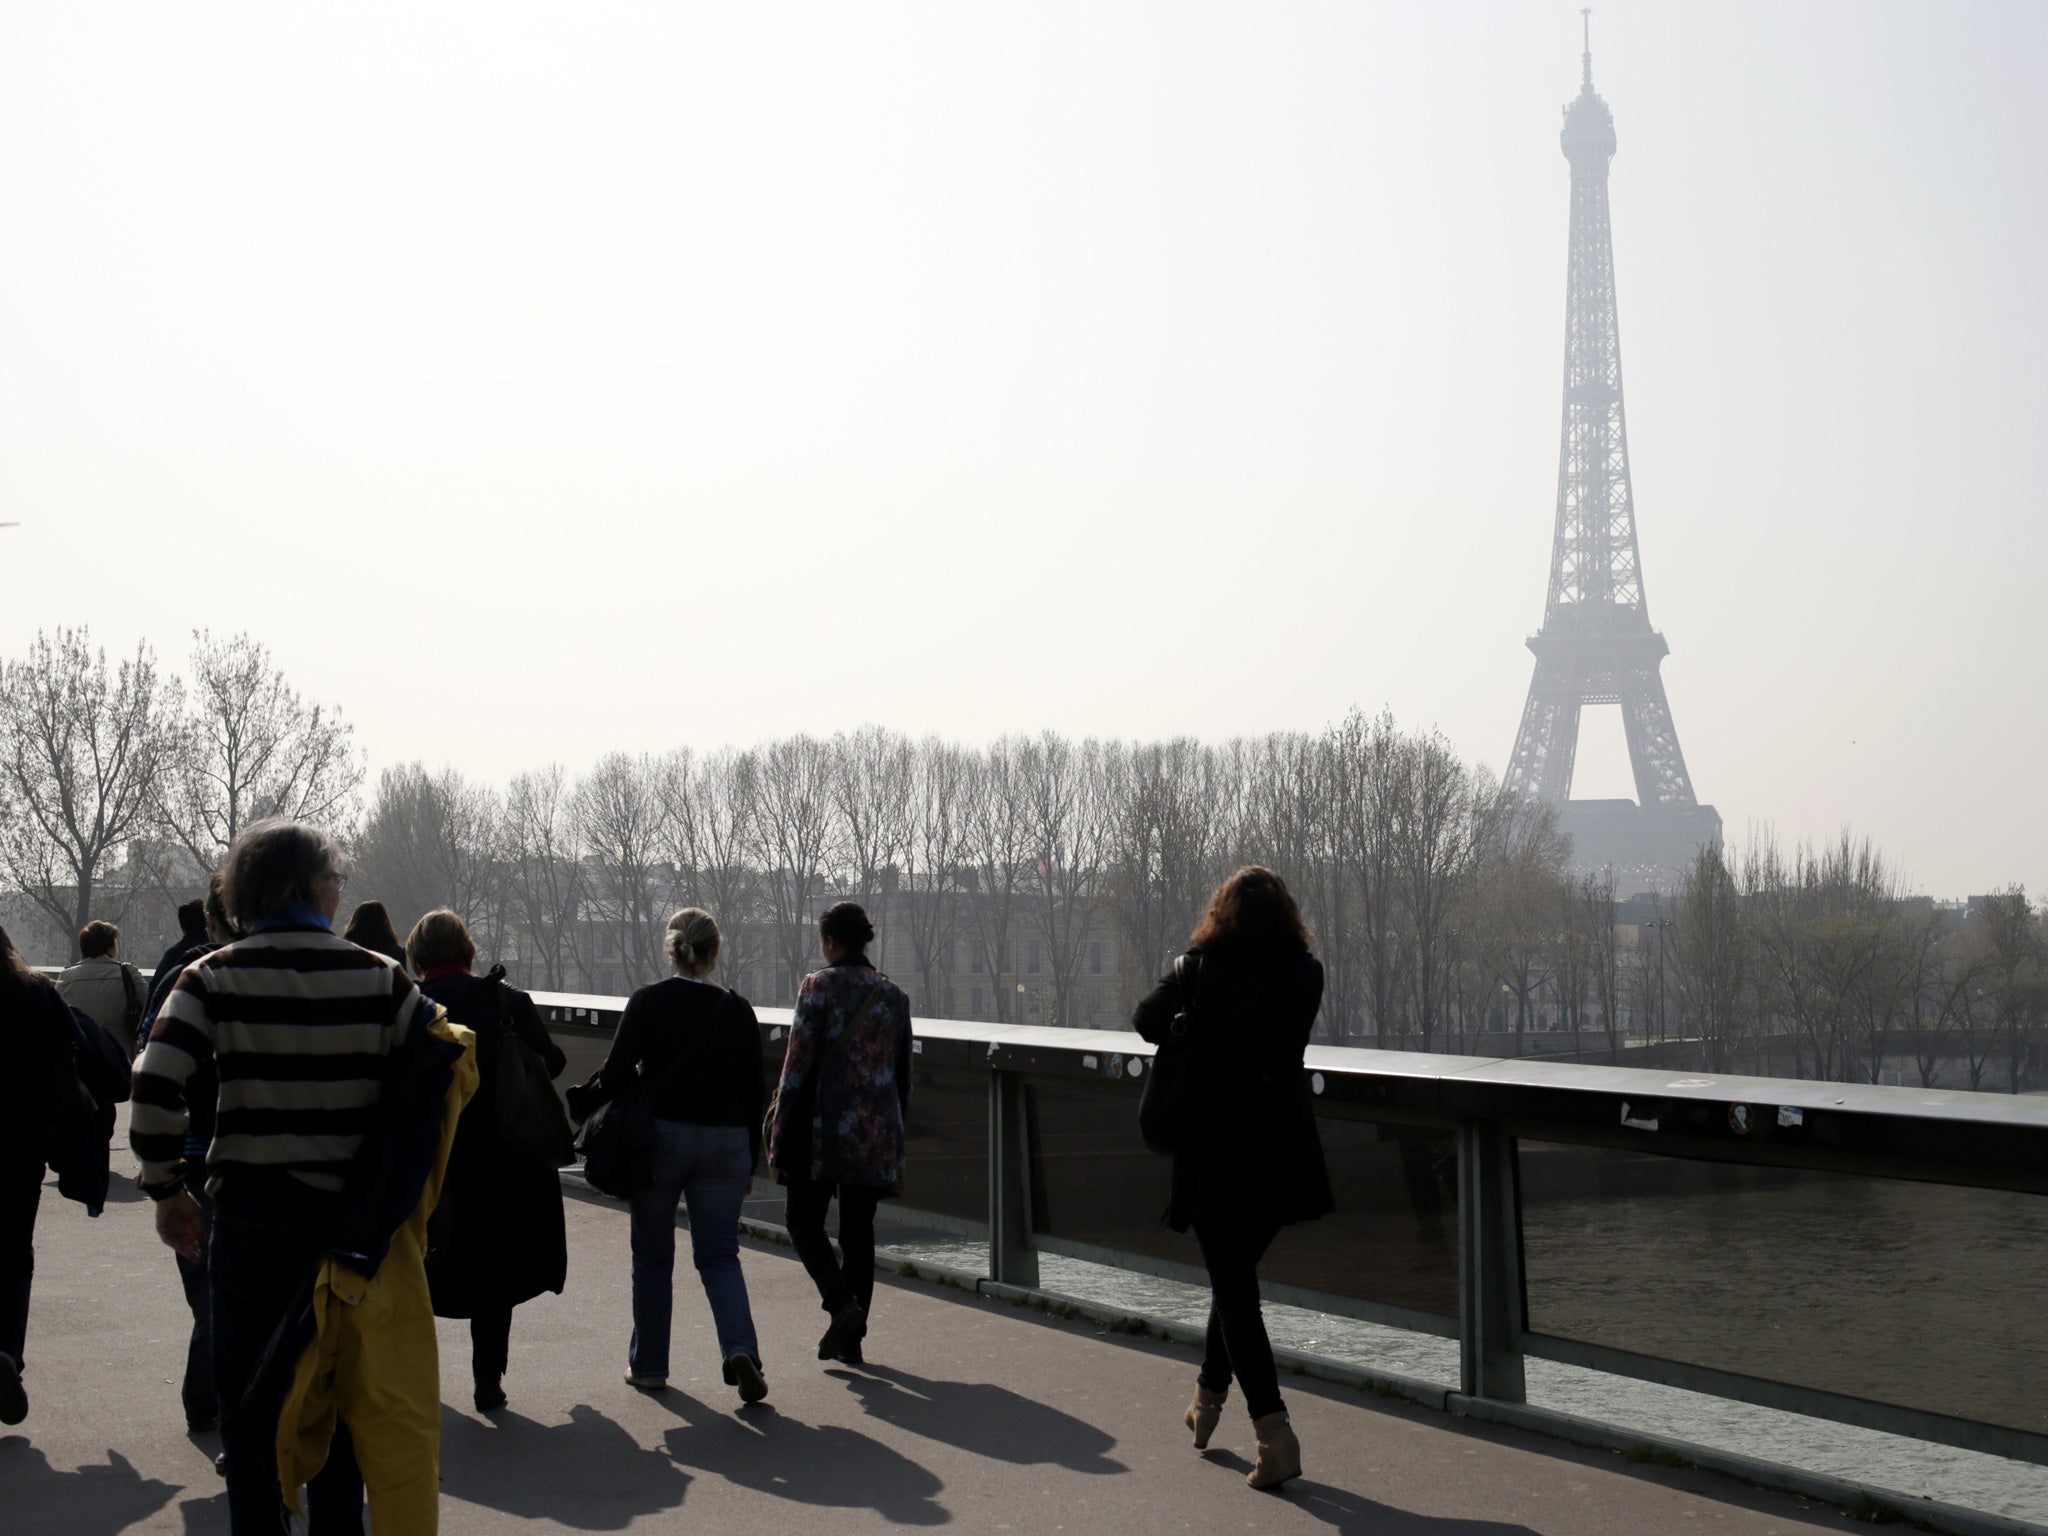 A picture taken on 14 March 2014 shows the Eiffel tower in central Paris through a haze of pollution. More than 30 departments in France have been hit by maximum level pollution alerts